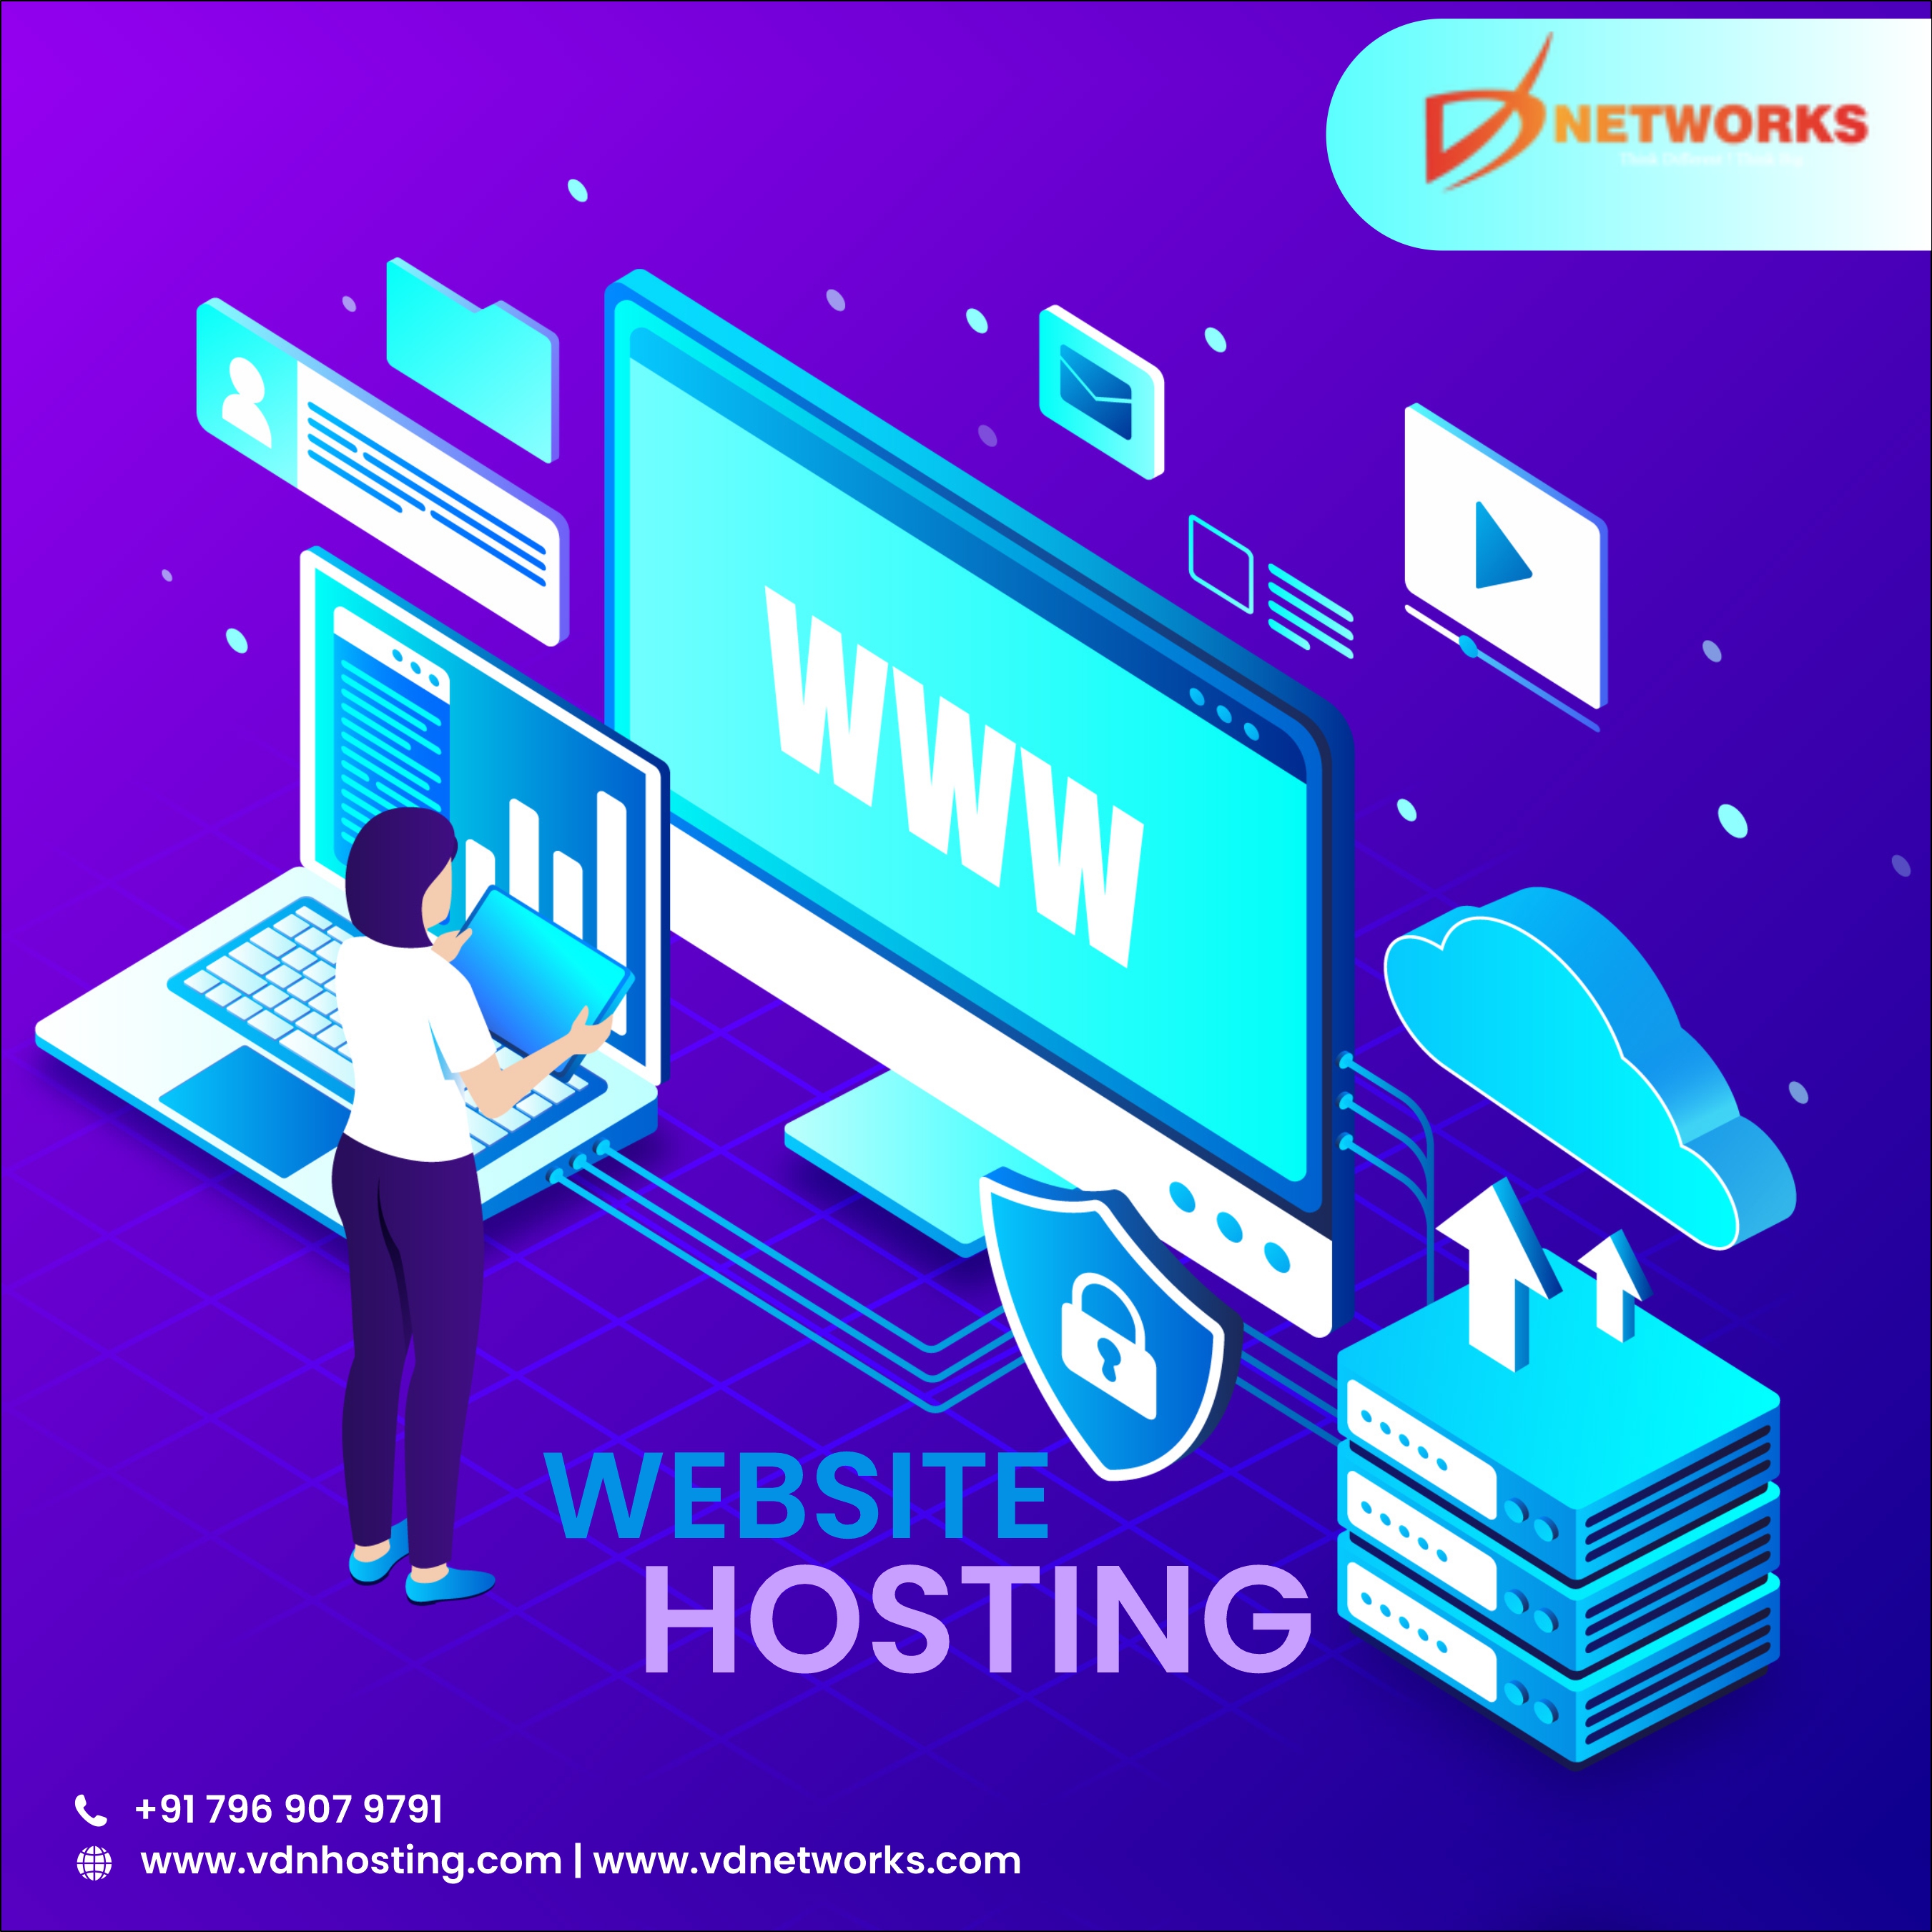 Web hosting companies for your business: Why it’s beneficial?